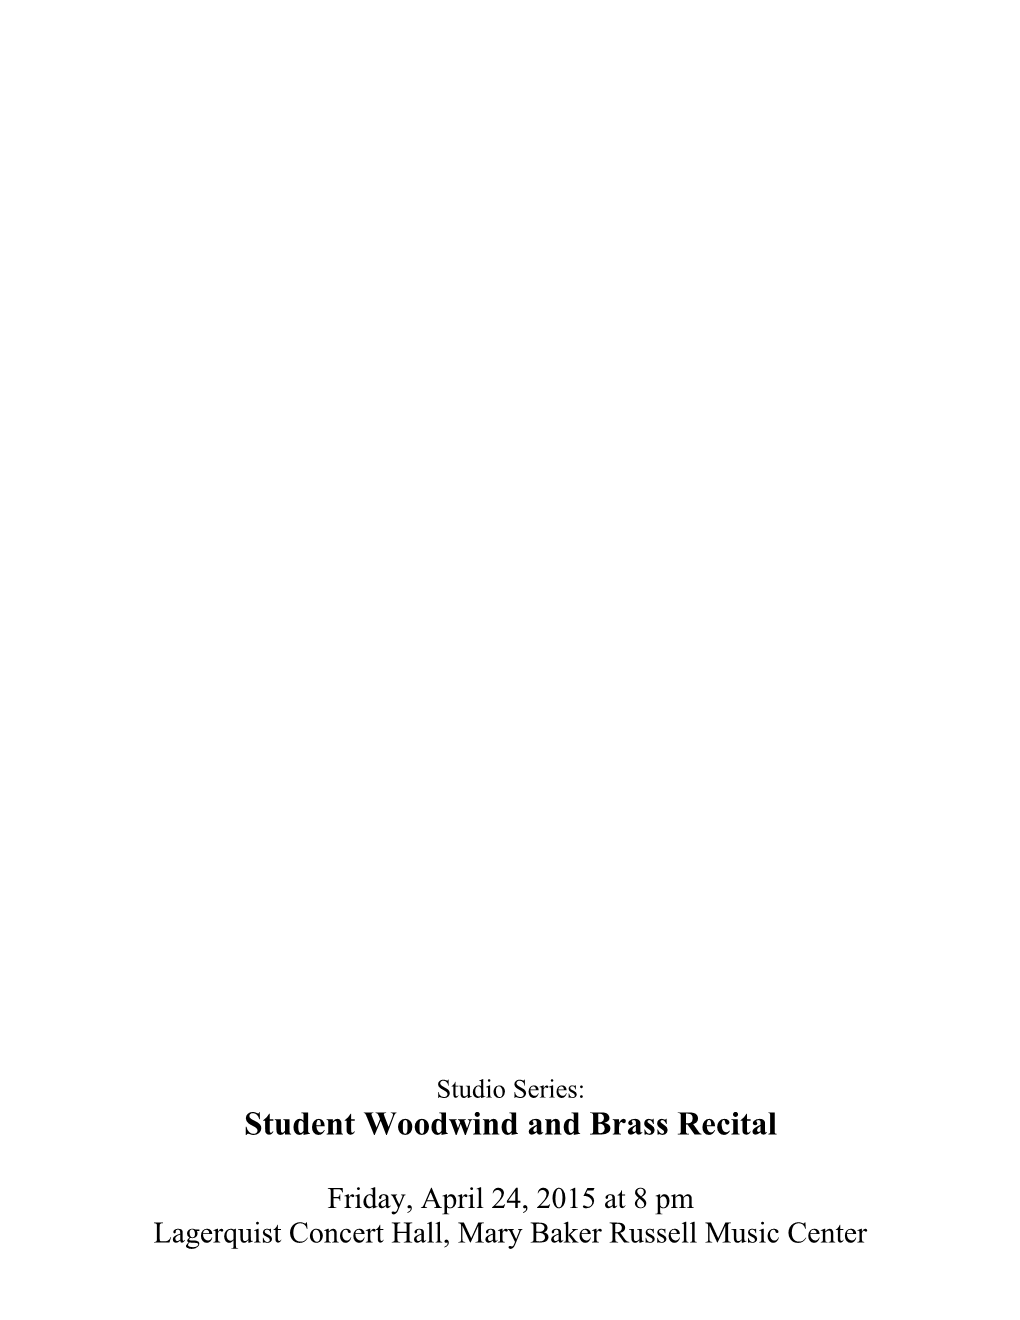 Student Woodwind and Brass Recital